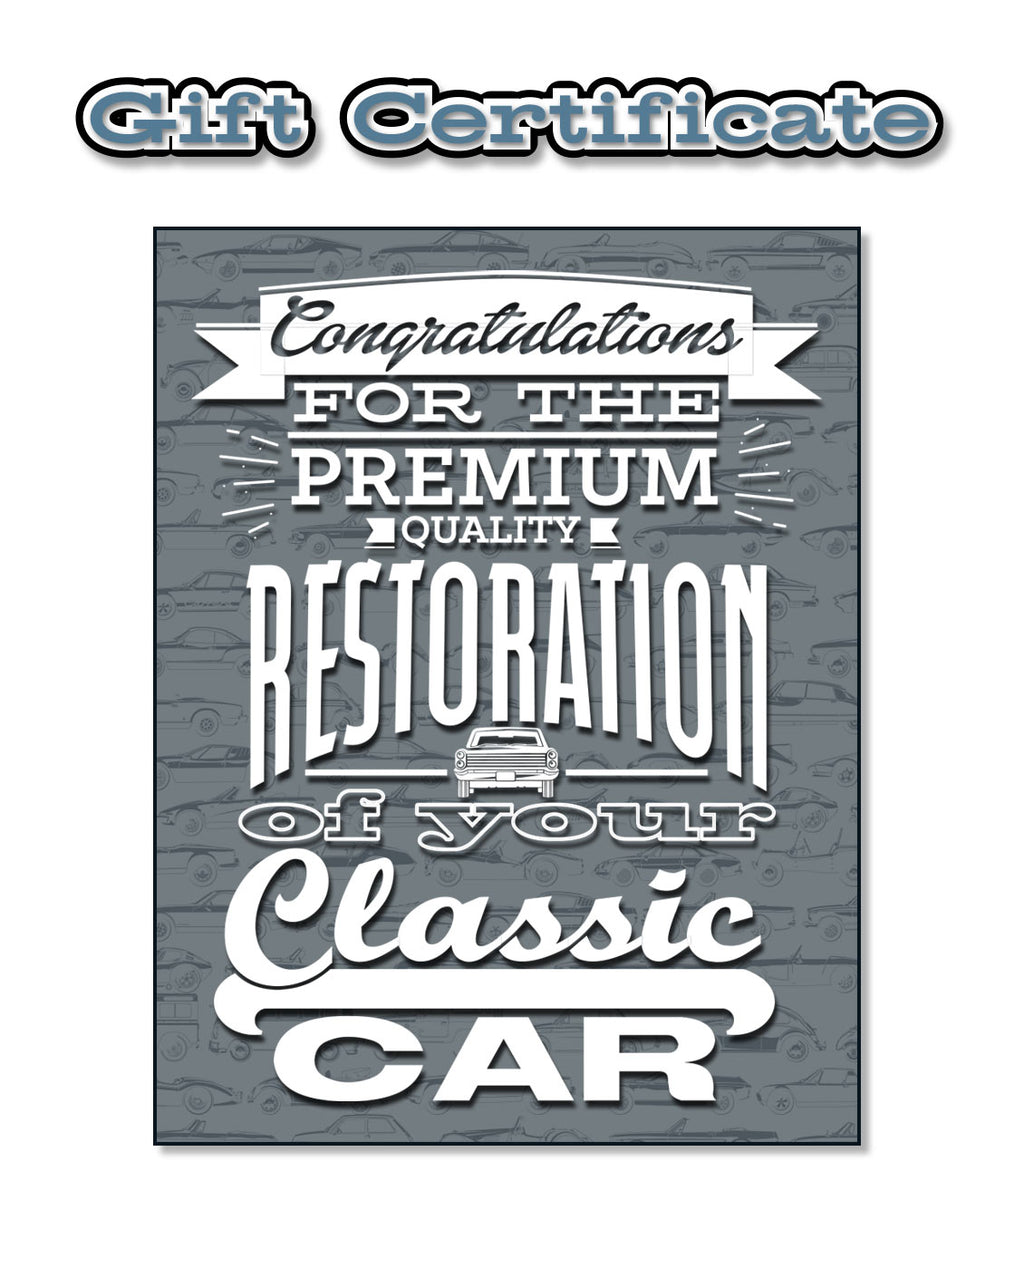 Gift Certificate - Completed Car Restoration!